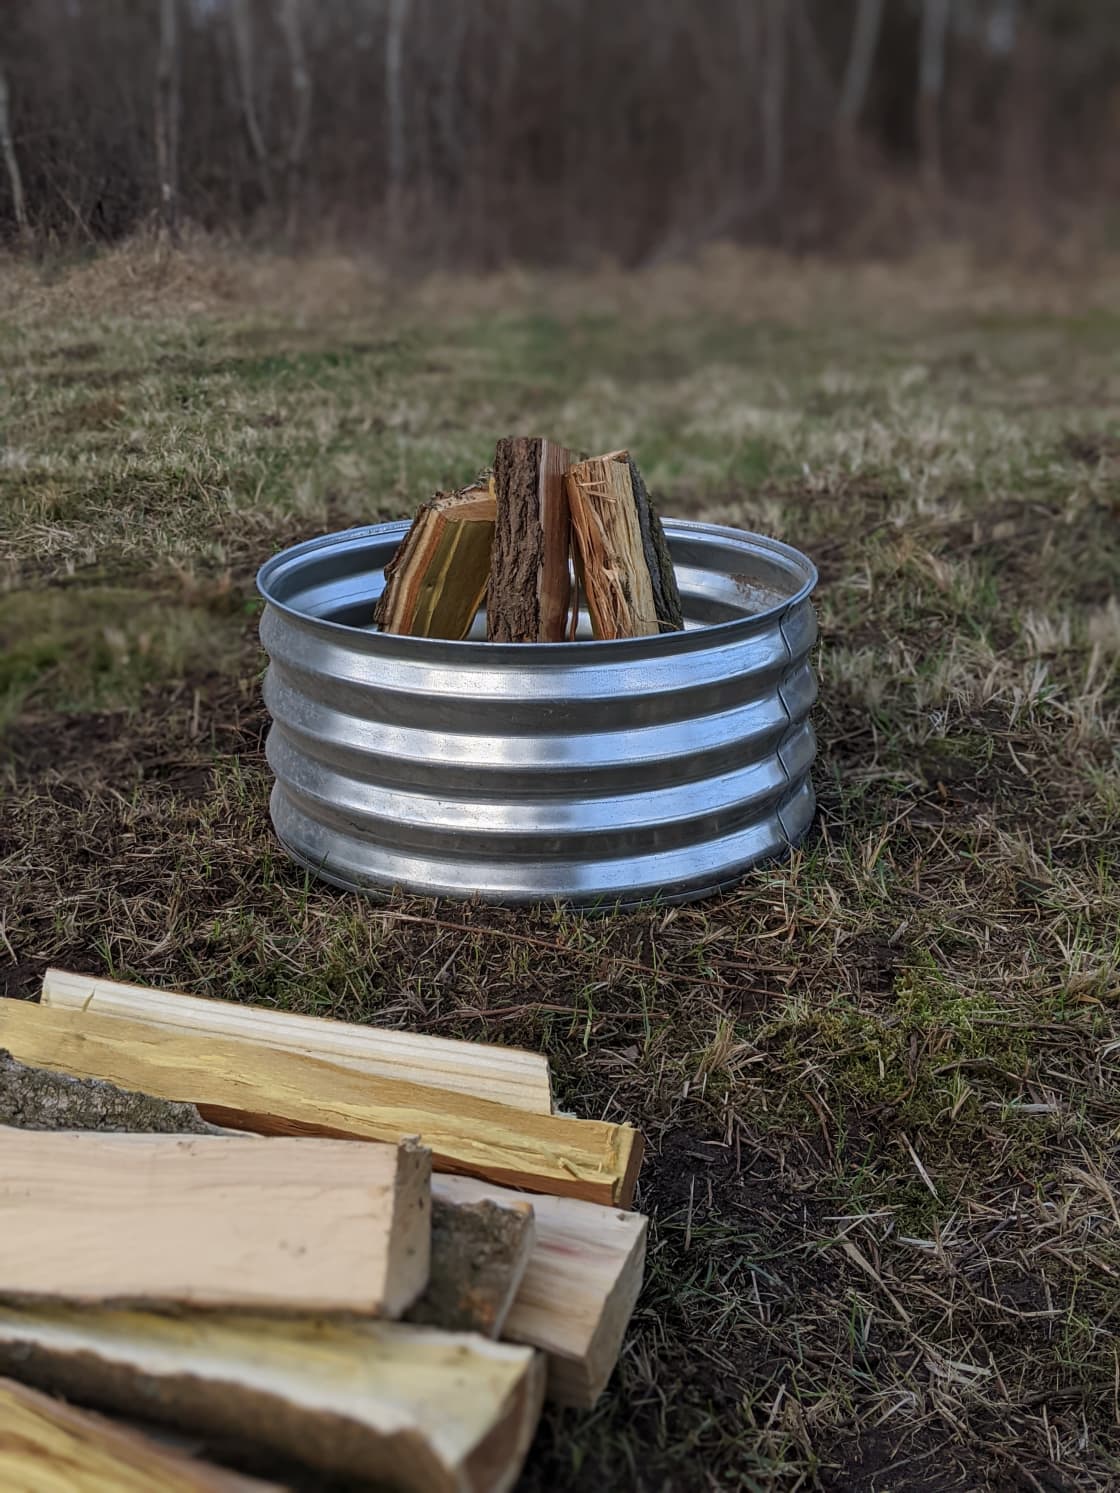 There is a fire pit at the site and a small supply of wood ready to go! Additional bundles of wood can be ordered and delivered to the site before your arrival for a small fee. 